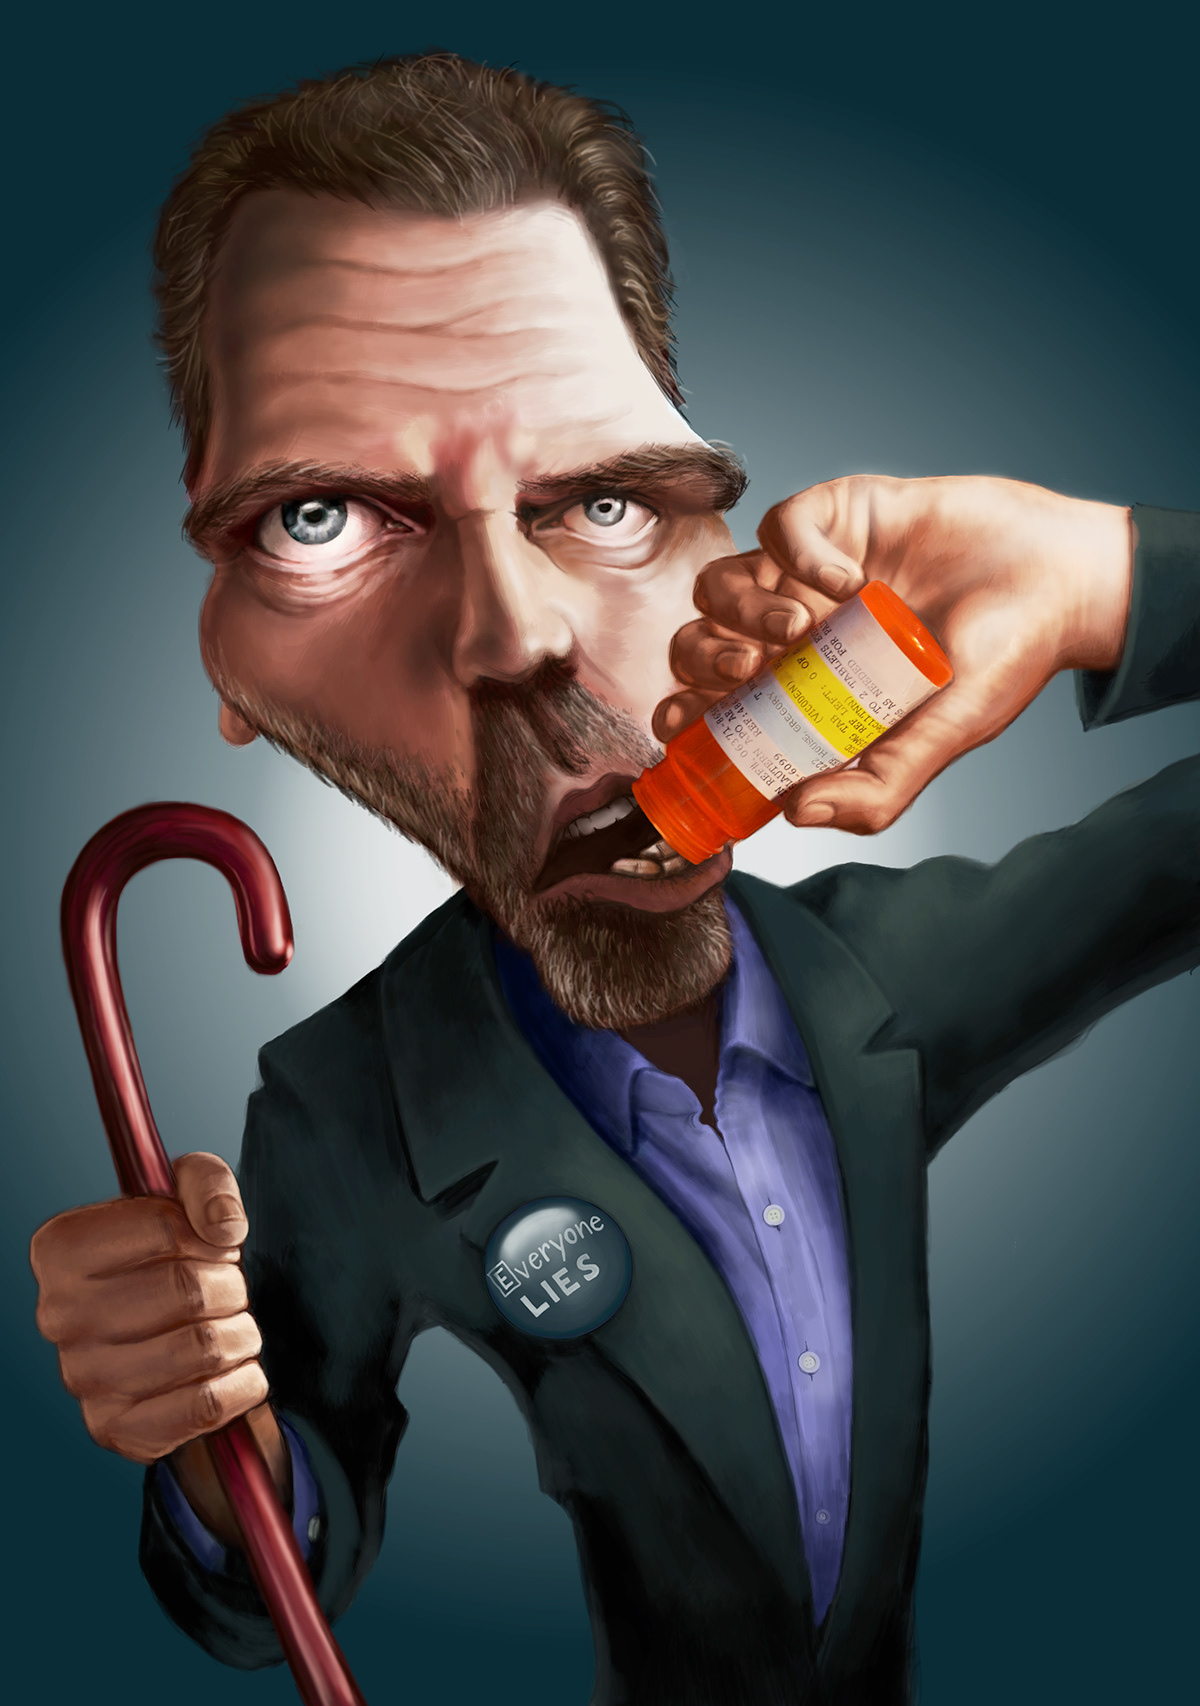 hugh laurie house md house caricature  